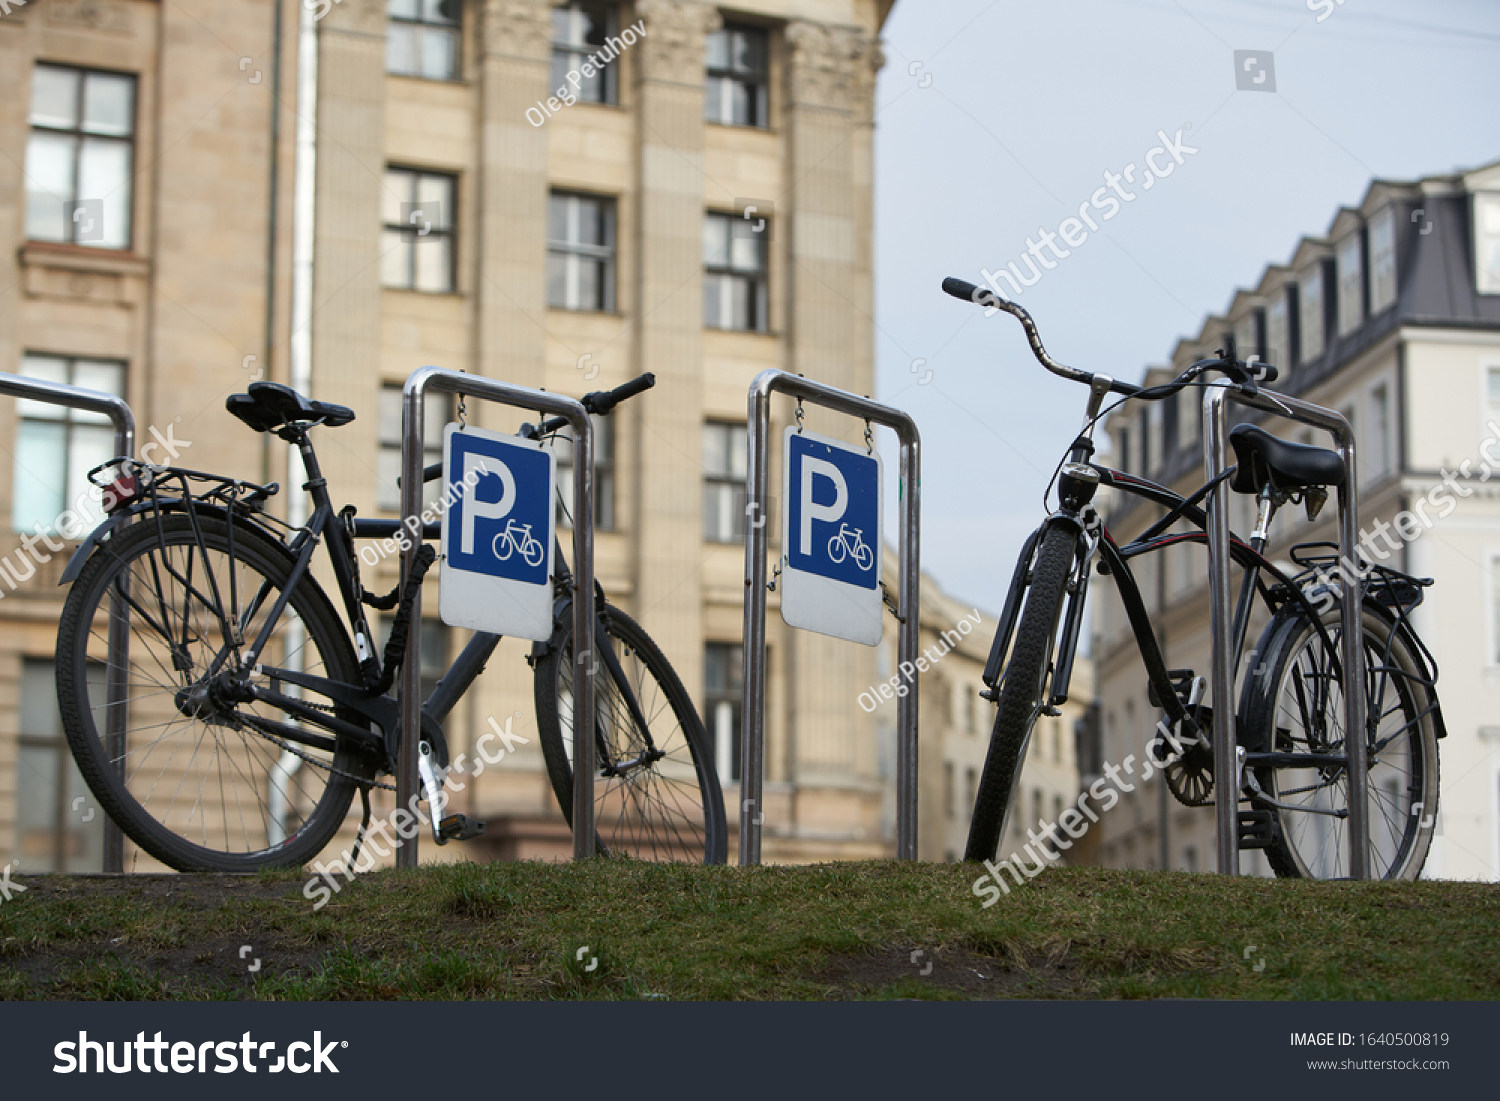 Bicycle secured on a parking in a city. #1640500819